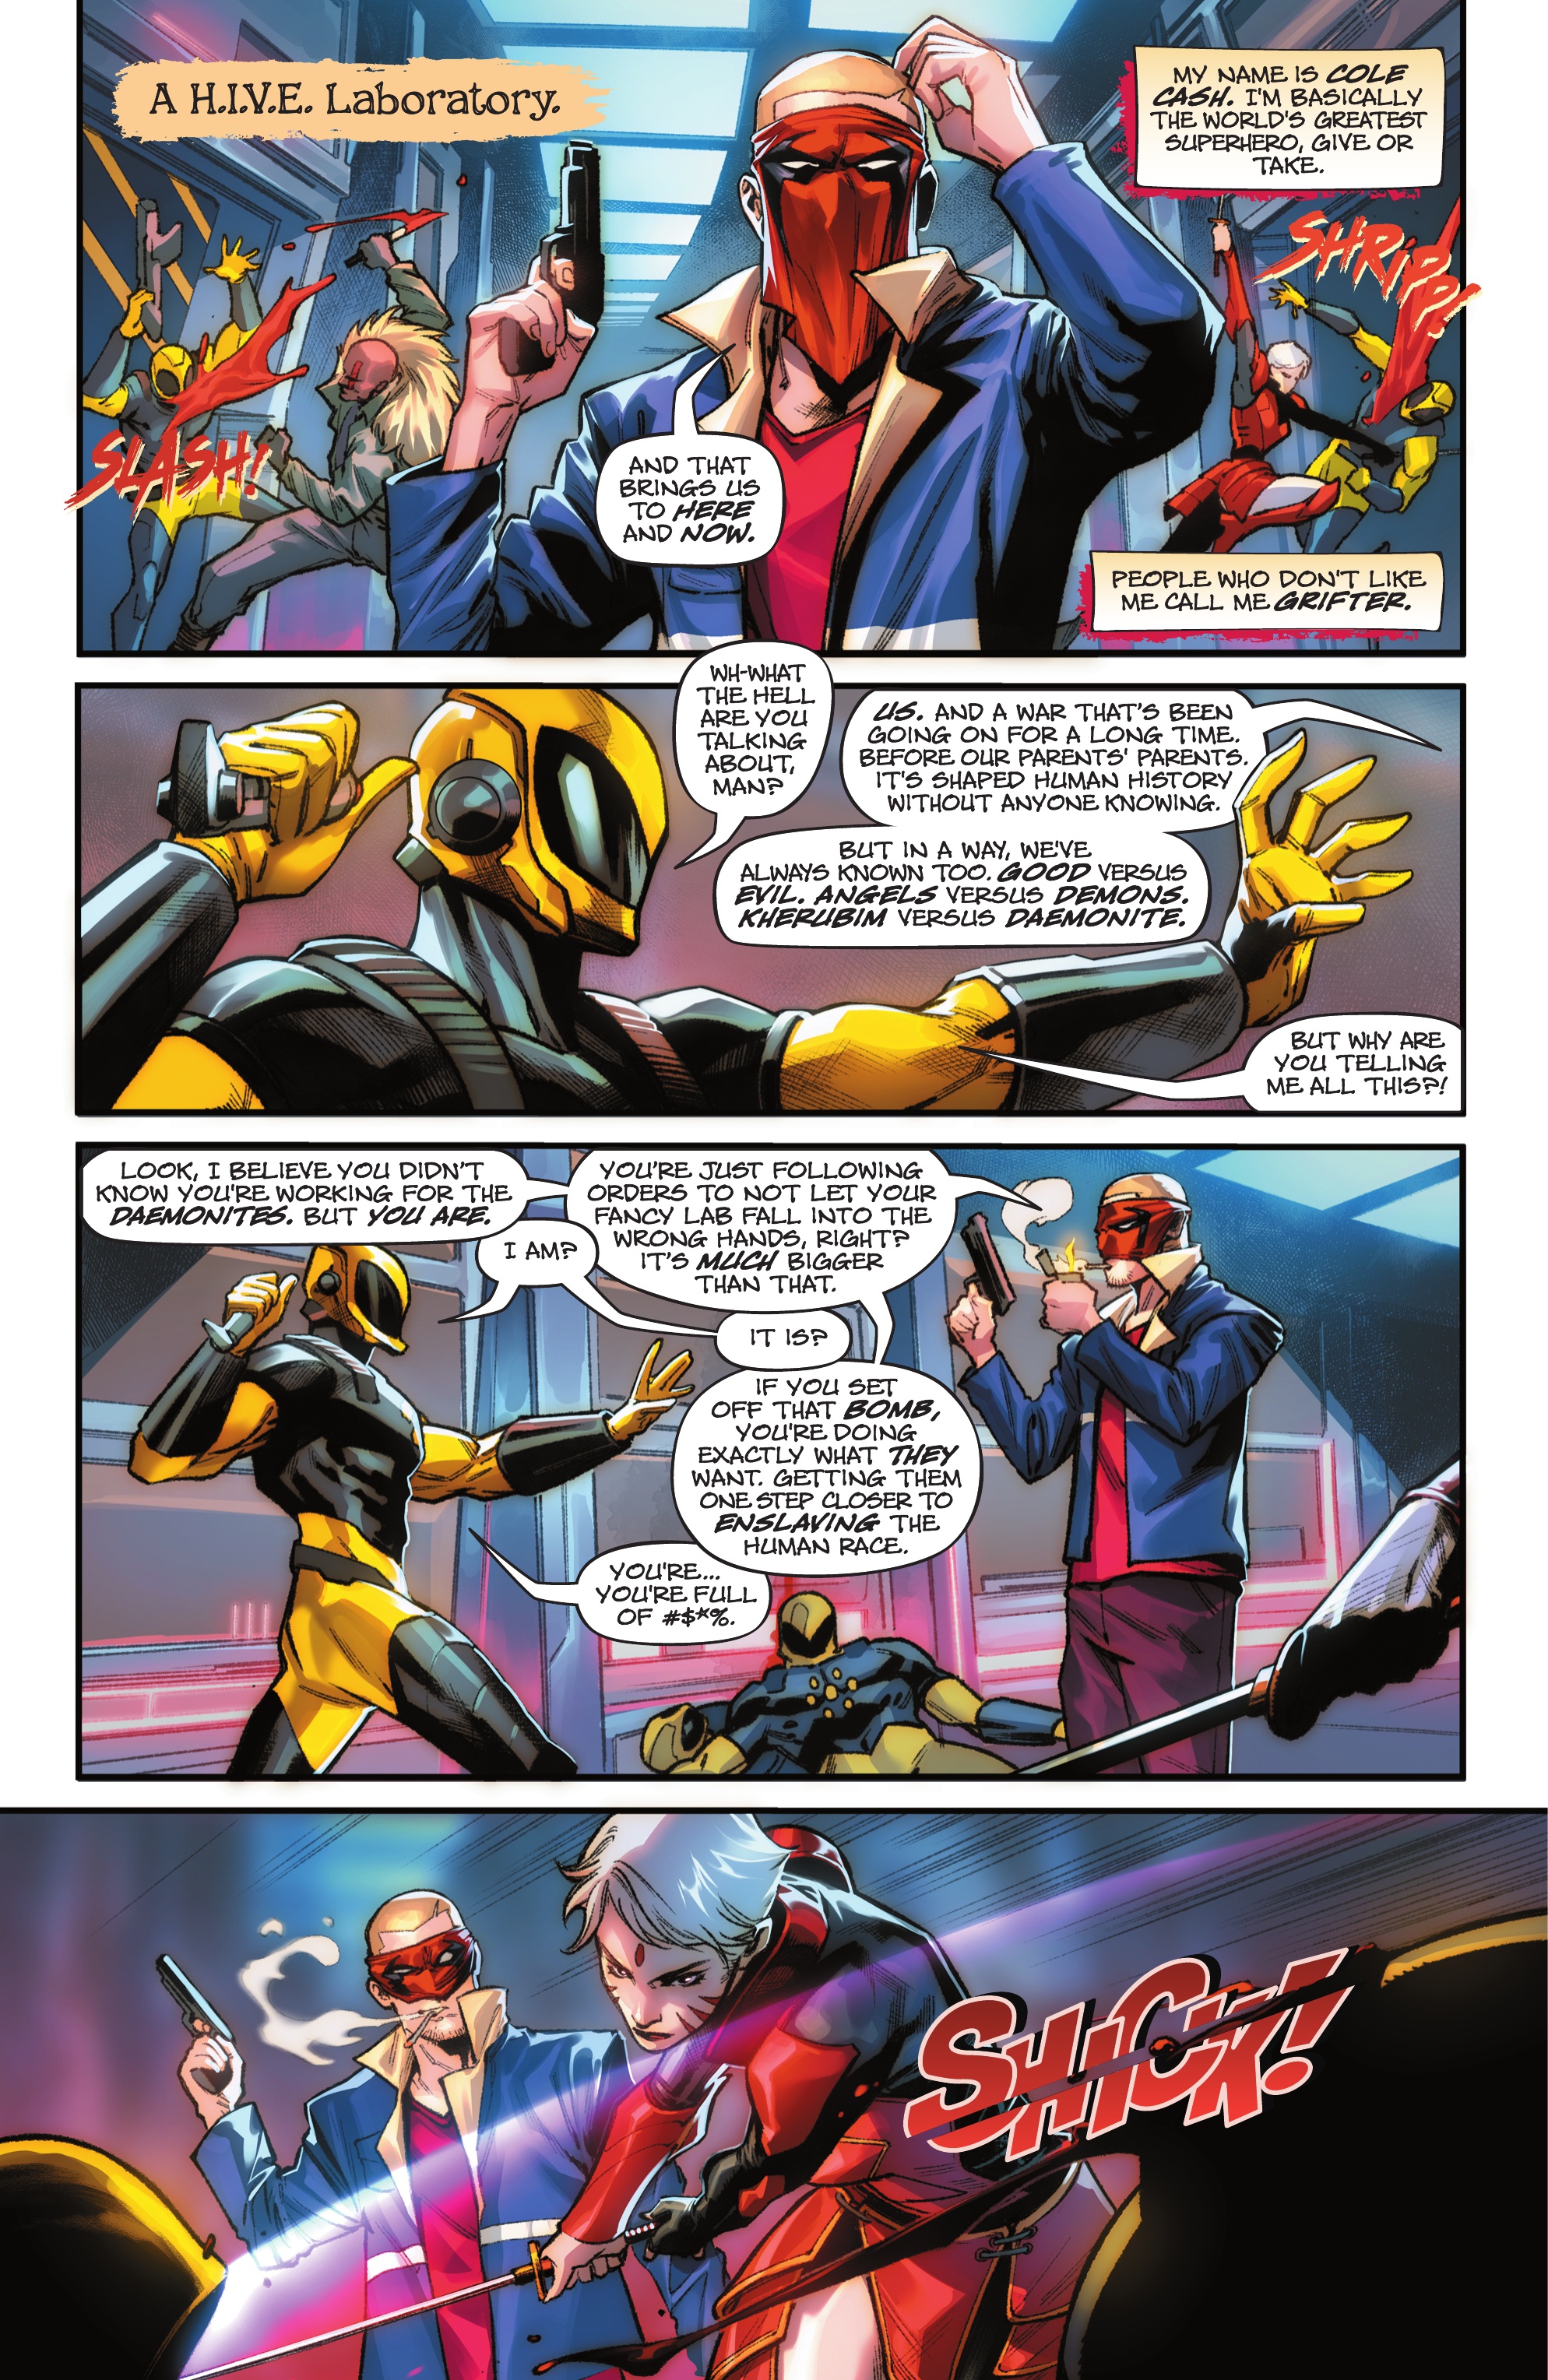 WildC.A.T.s (2022-): Chapter 1 - Page 4